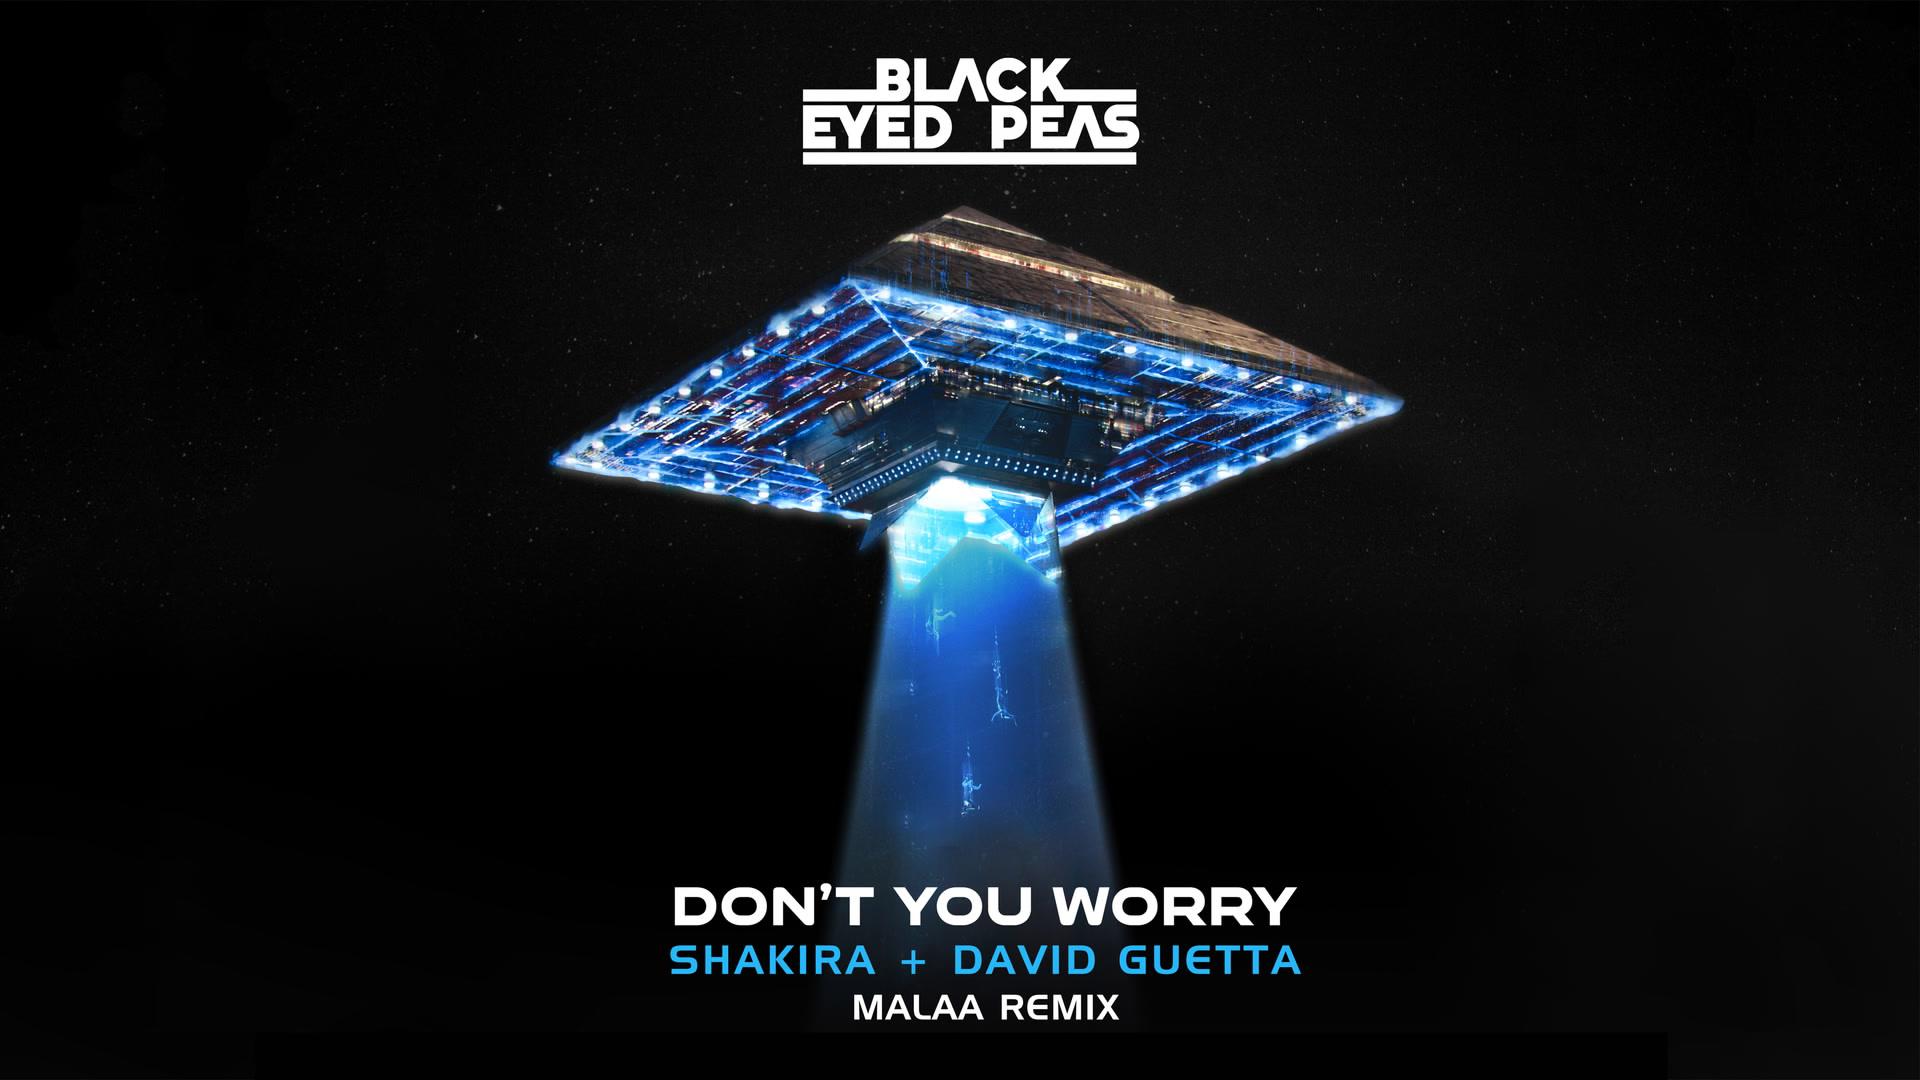 Black Eyed Peas - DON'T YOU WORRY (Malaa Remix - Official Audio)